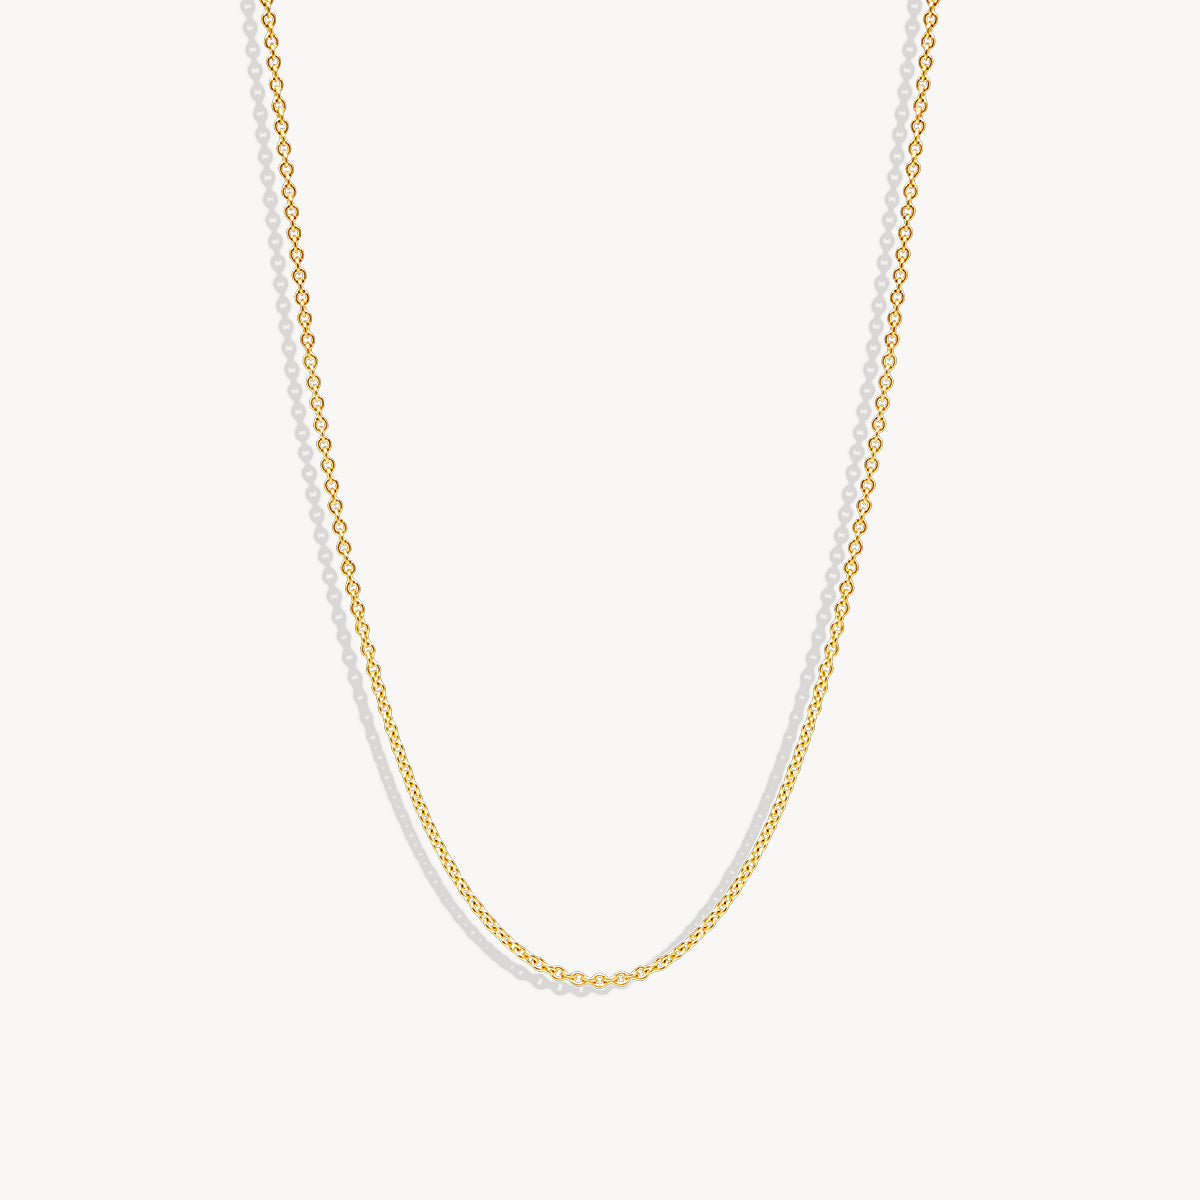 By Charlotte 14k Gold 18" Rolo Chain Necklace